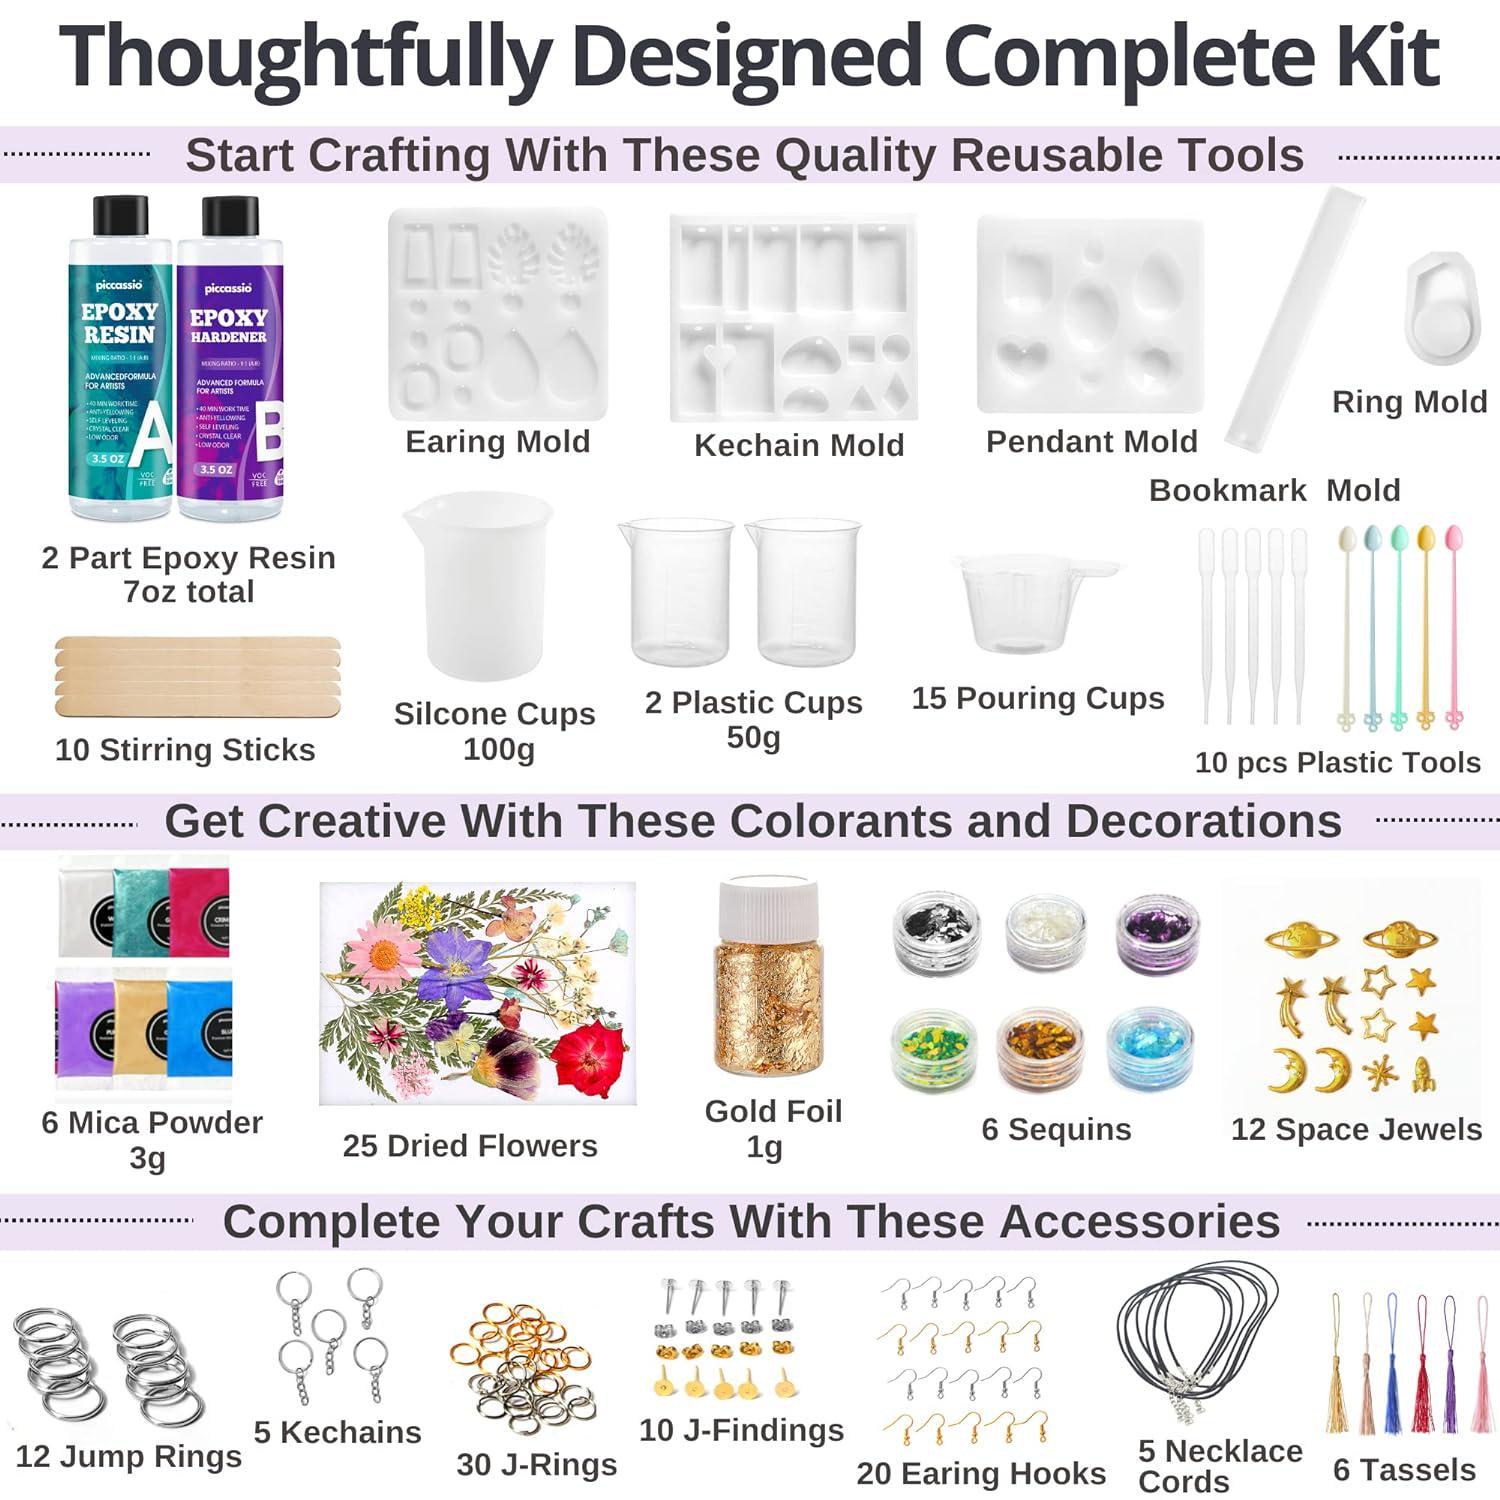 Piccassio Epoxy Resin Kit for Beginners 208 Pcs - Make Jewelry, Keychains, Bookmarks with Epoxy Resin Starter Kit - Resin Kit and Molds Complete Set